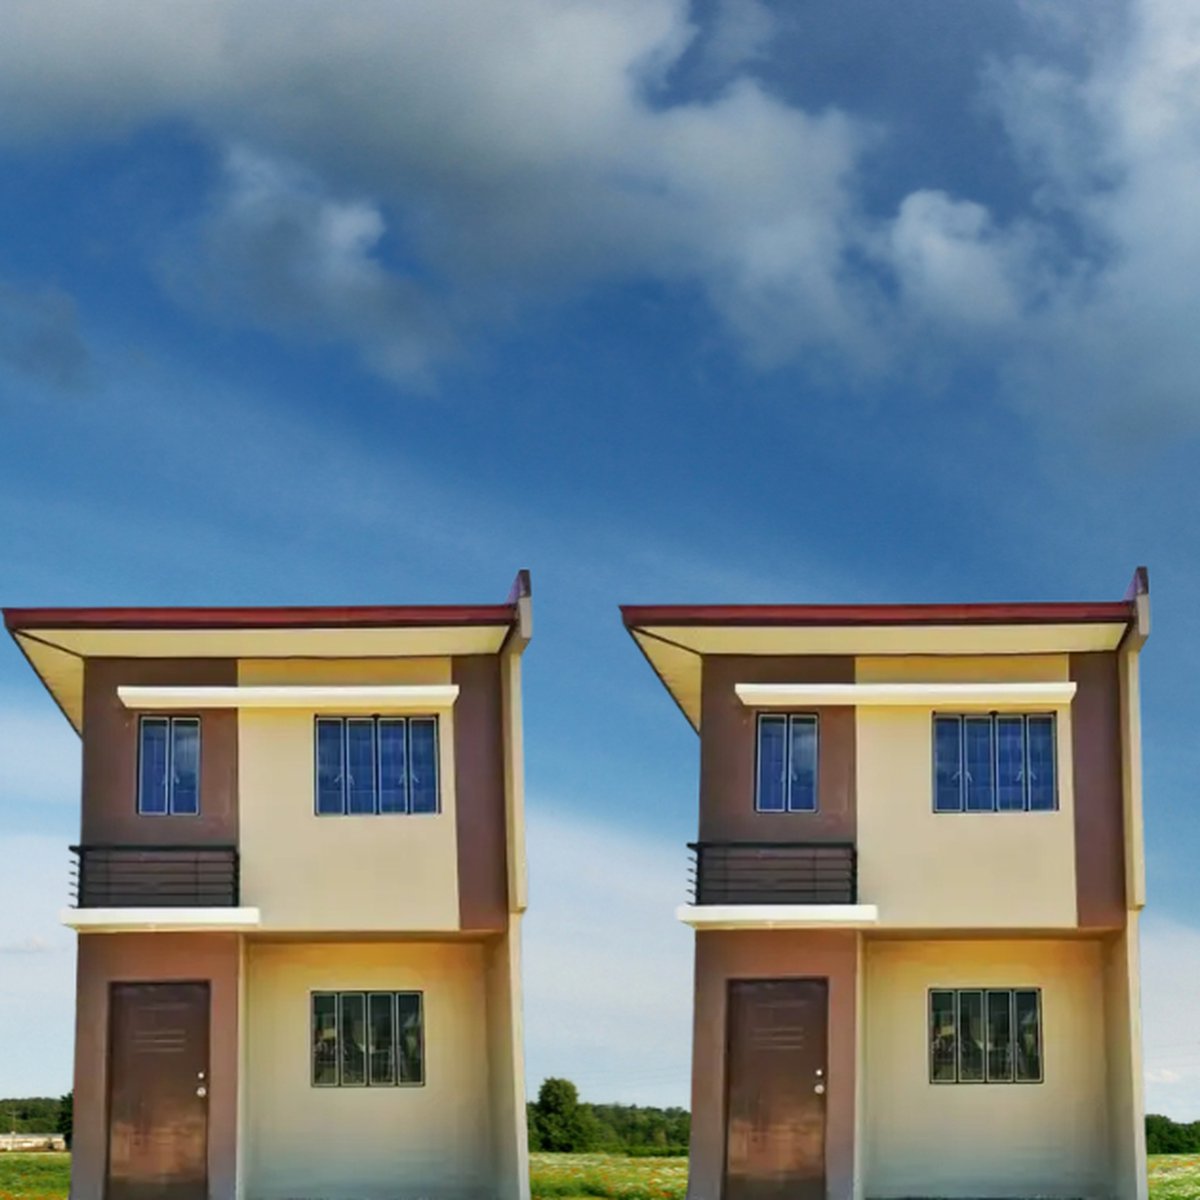 3-bedroom single detached house for sale in cauayan isabela